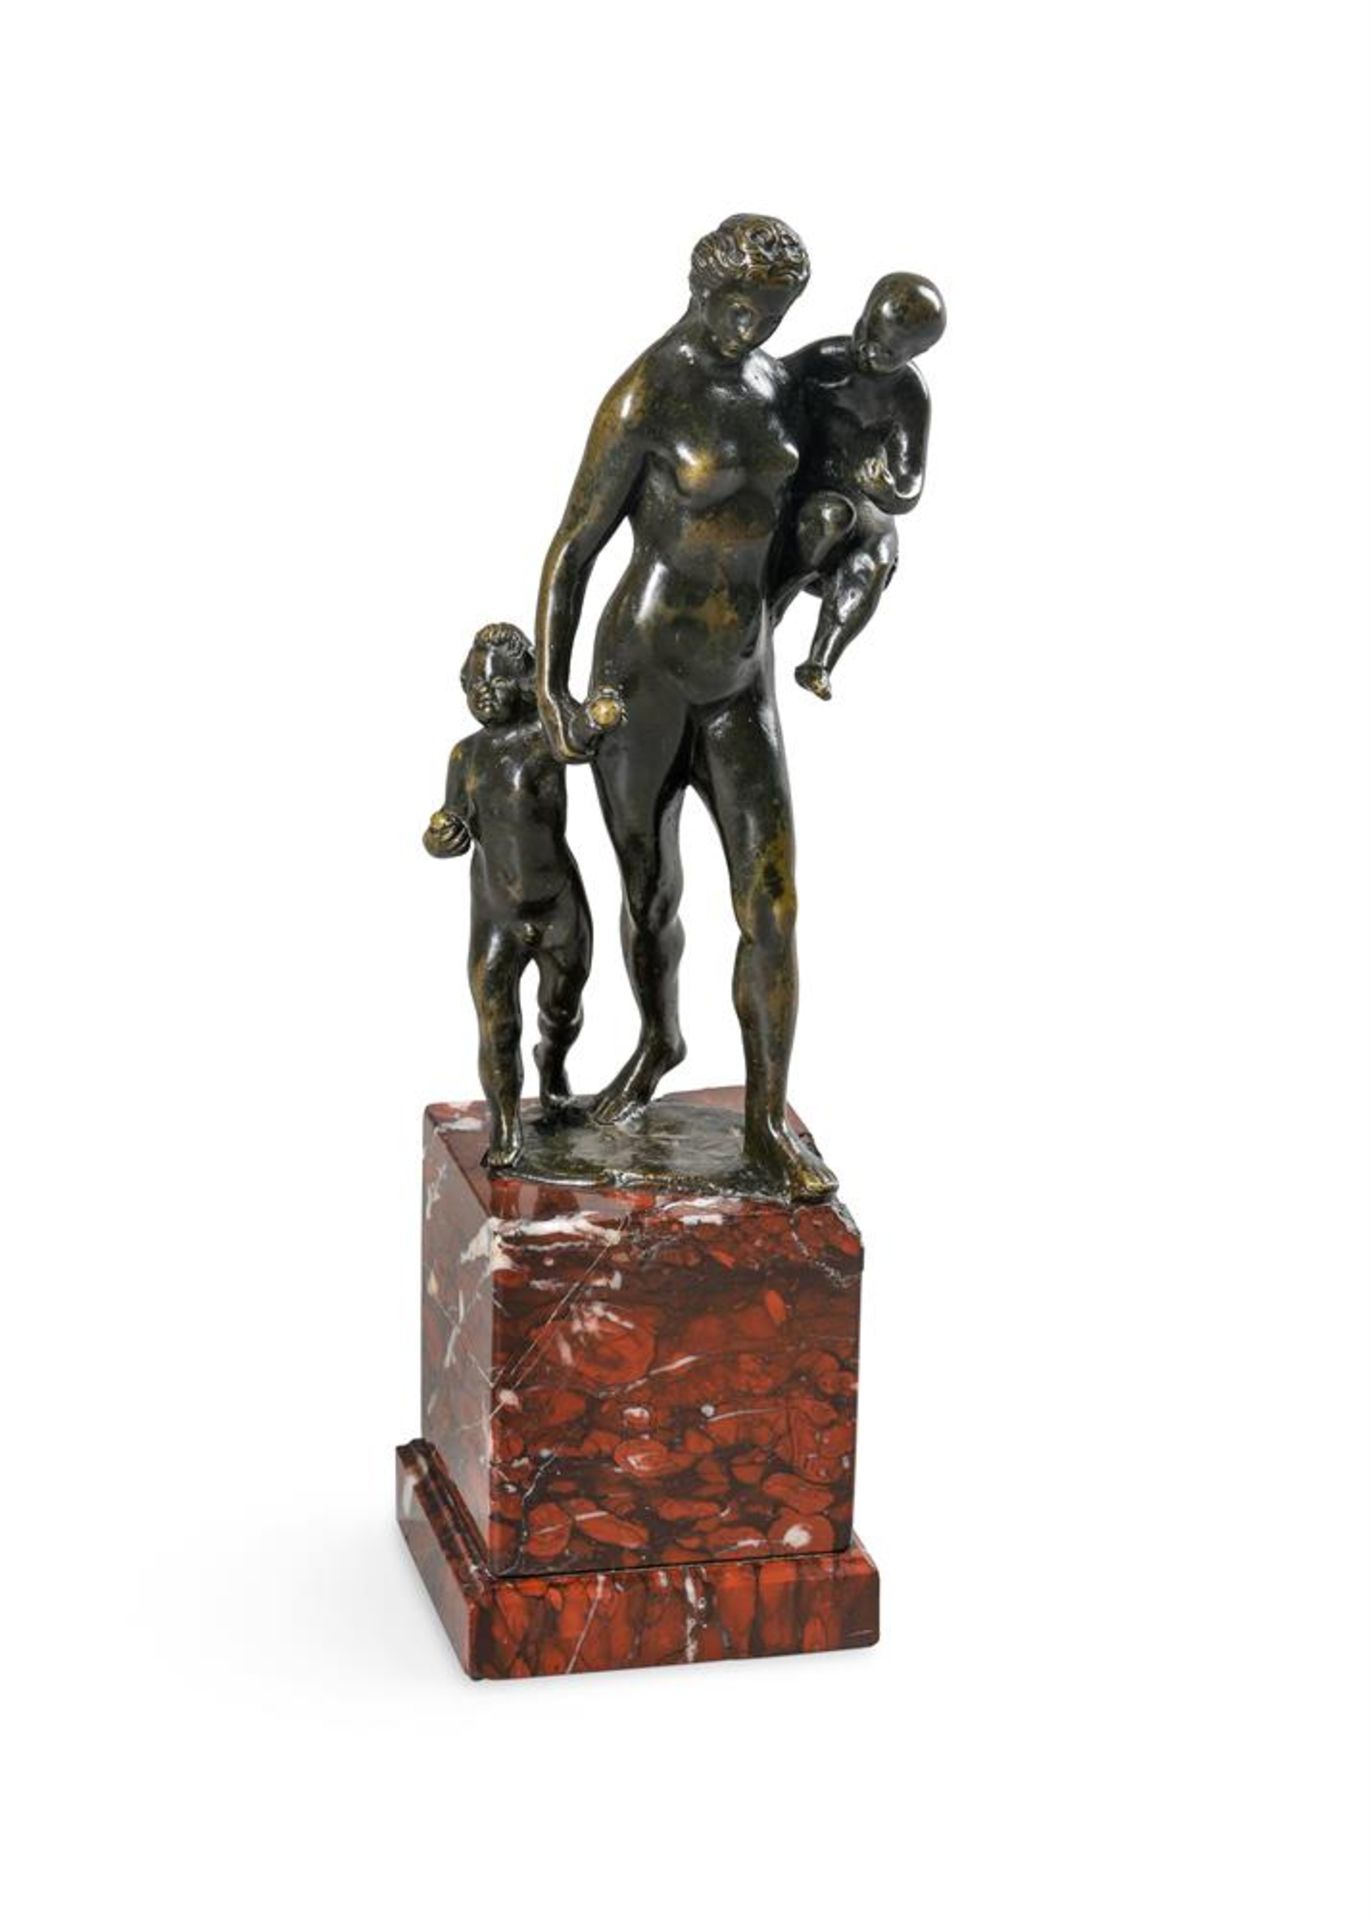 A BRONZE ALLEGORICAL GROUP EMBLEMATIC OF CHARITY, PROBABLY DUTCH, 17TH CENTURY